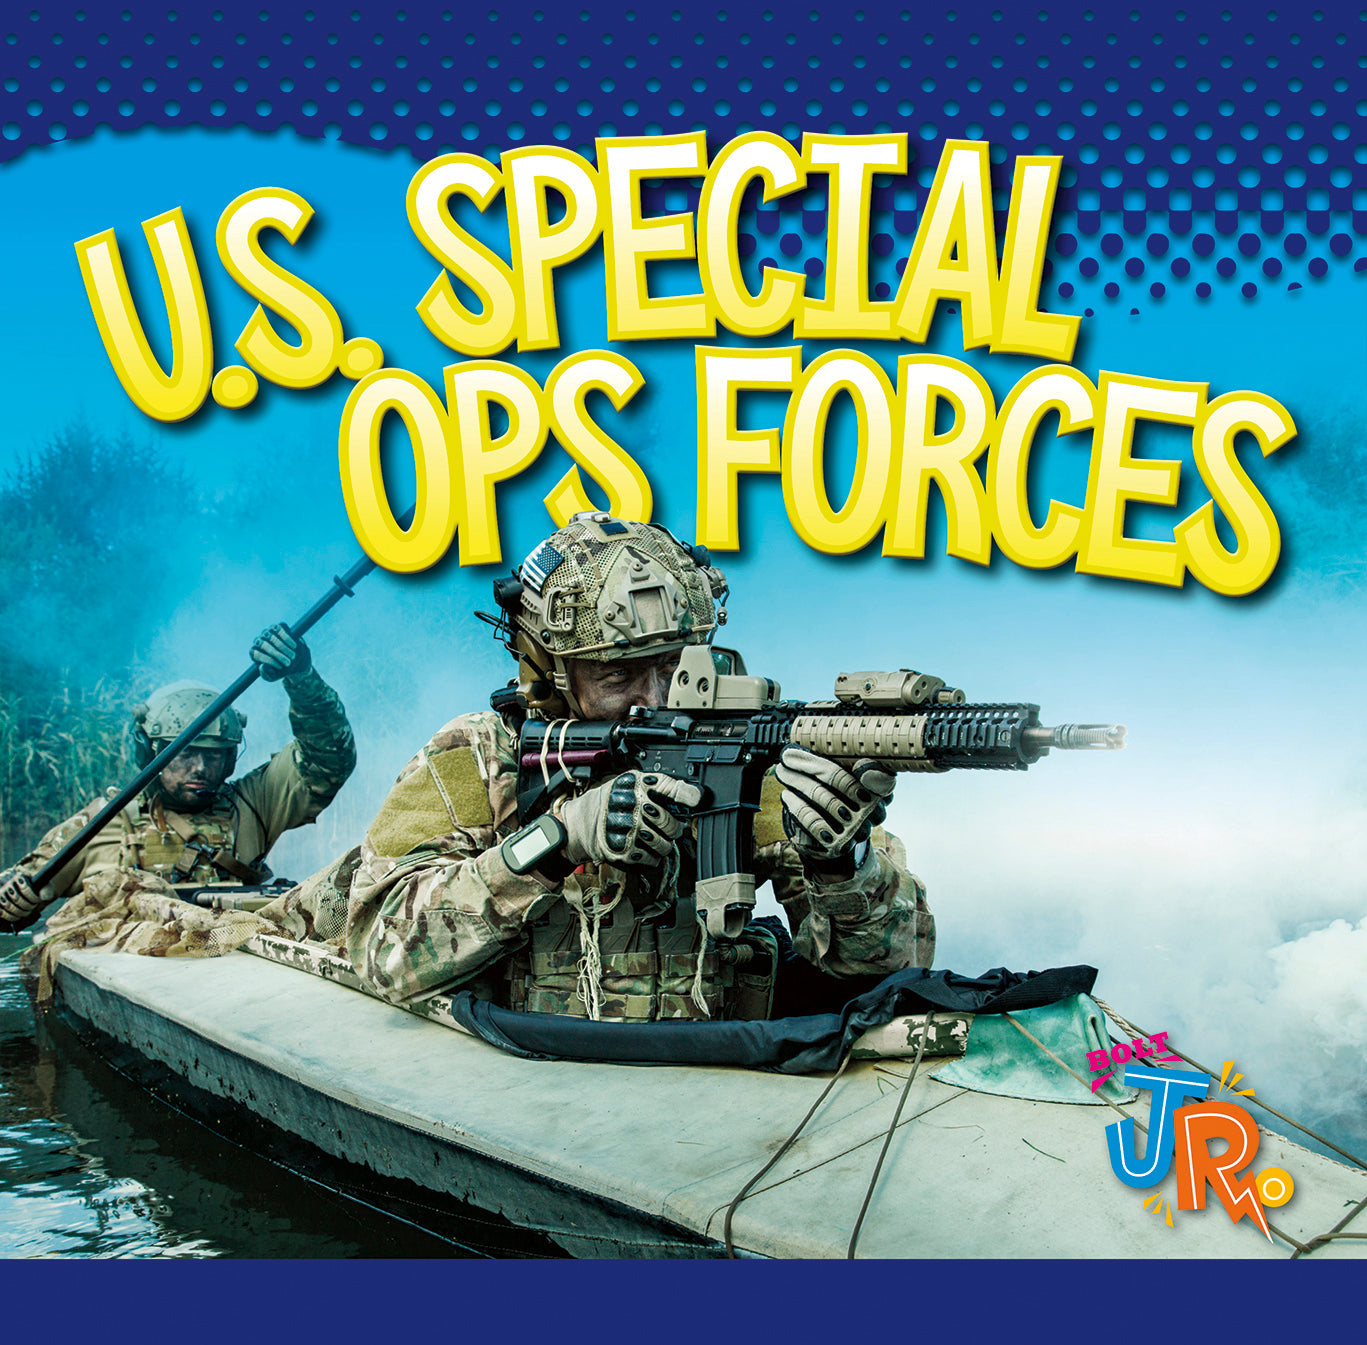 Mighty Military: U.S. Special Ops Forces